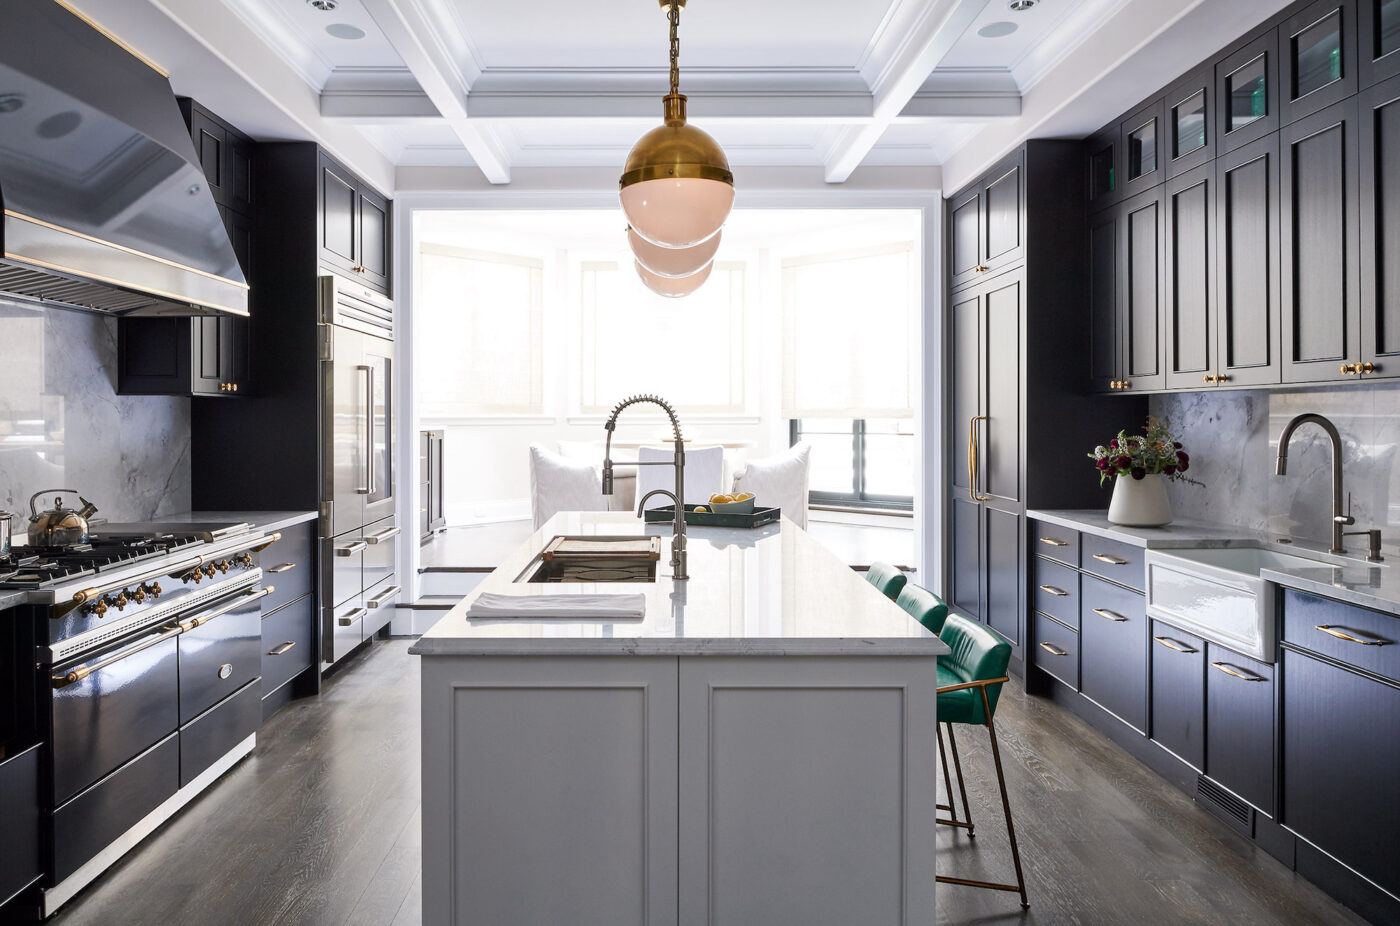 Black and White kitchen with large island